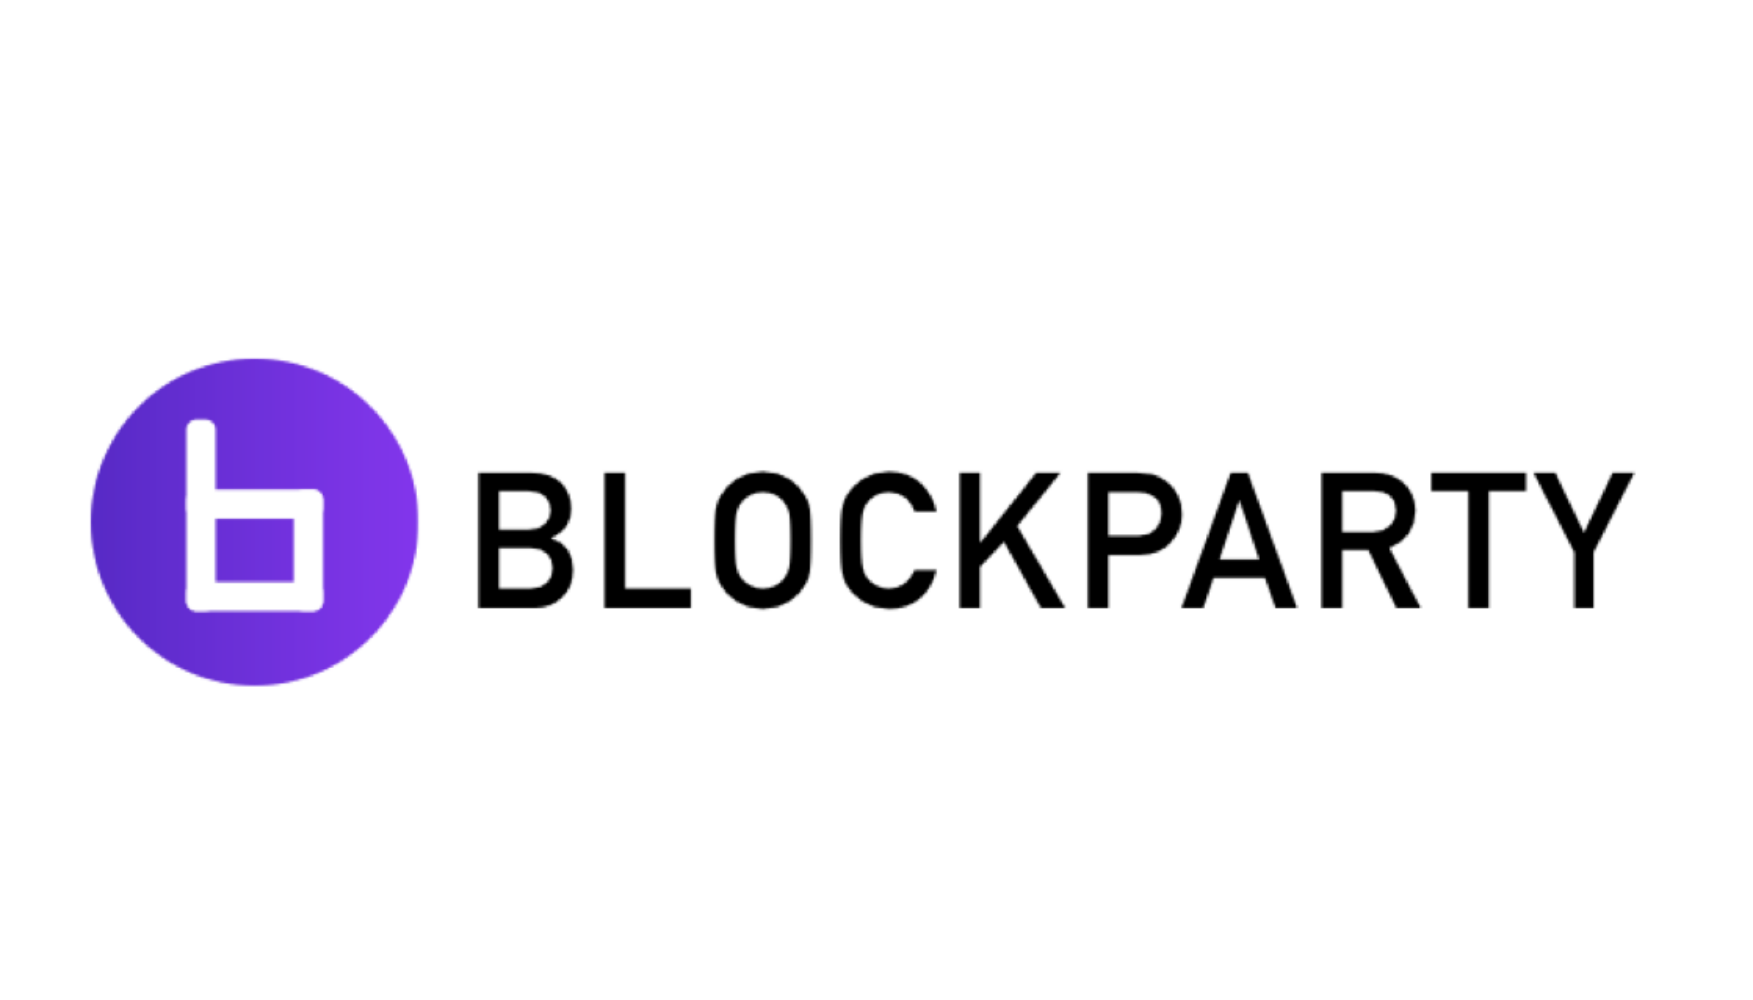 Blockparty